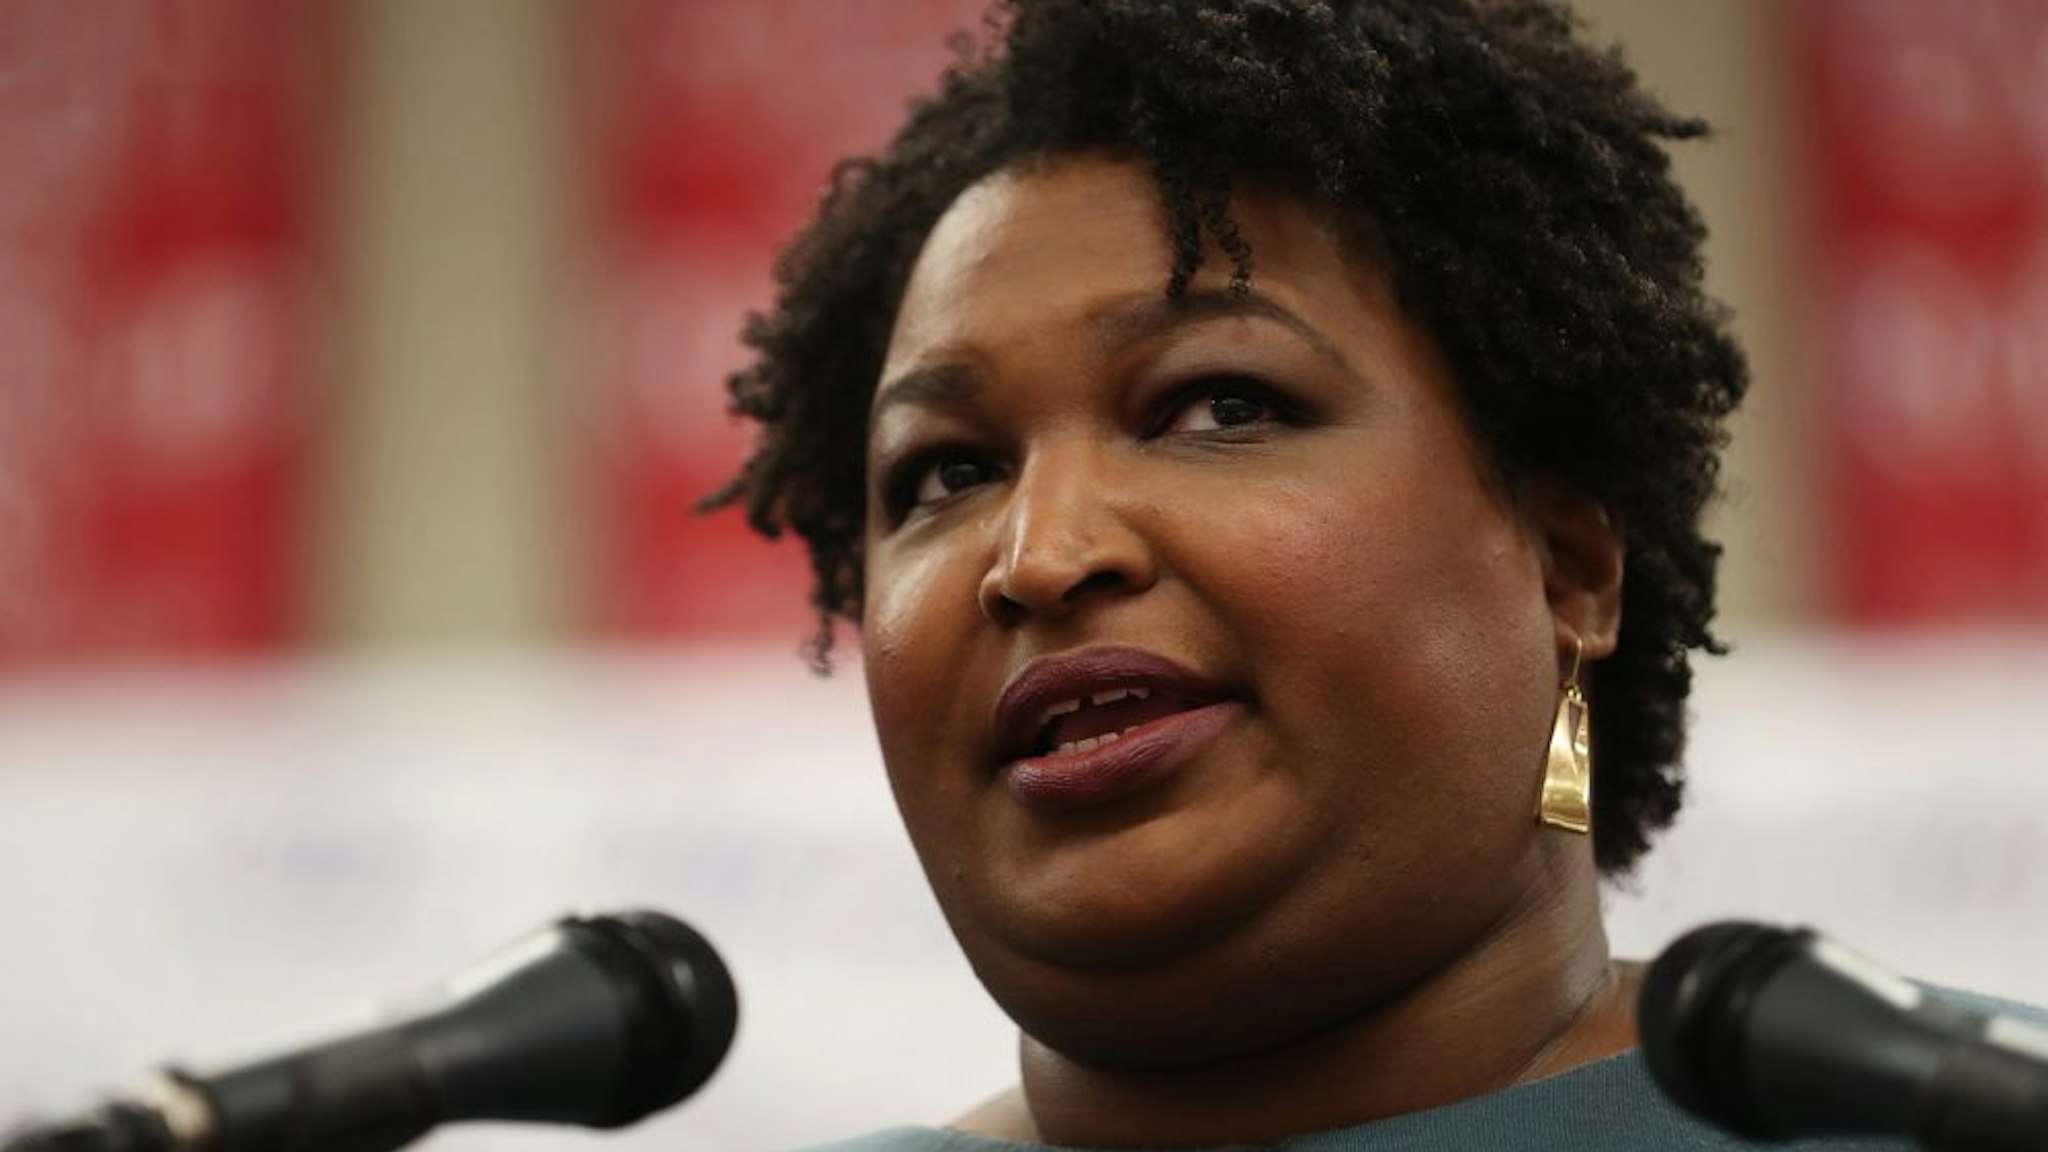 SELMA, AL - MARCH 01: Stacey Abrams speaks during the Martin &amp; Coretta S. King Unity Breakfast on March 1, 2020 in Selma, Alabama. Presidential candidates and their supporters continue to campaign before voting starts on Super Tuesday, March 3.